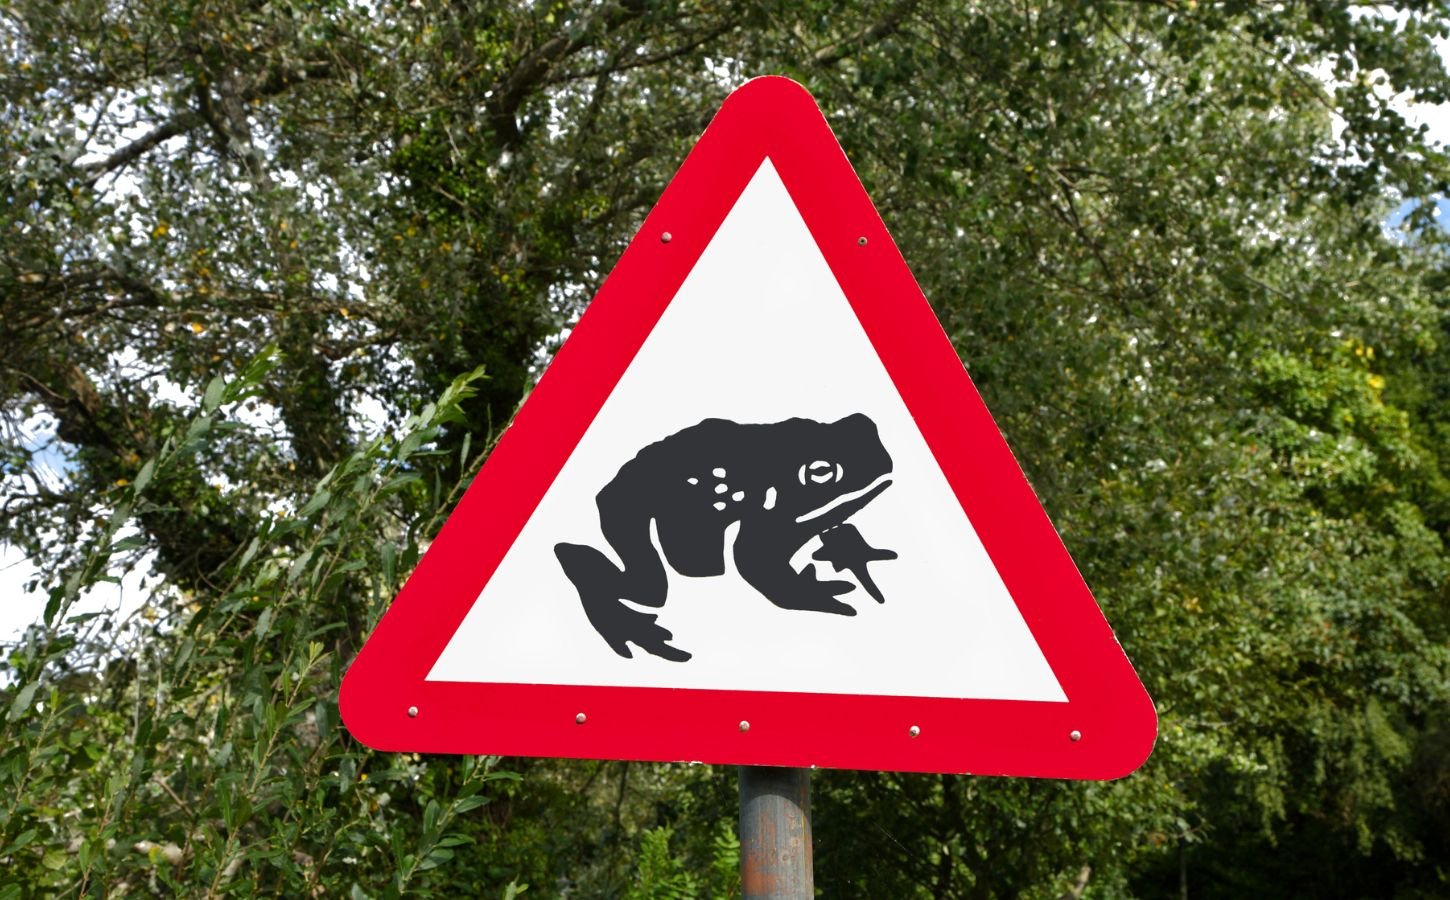 A road sign warning drivers that toads may be crossing